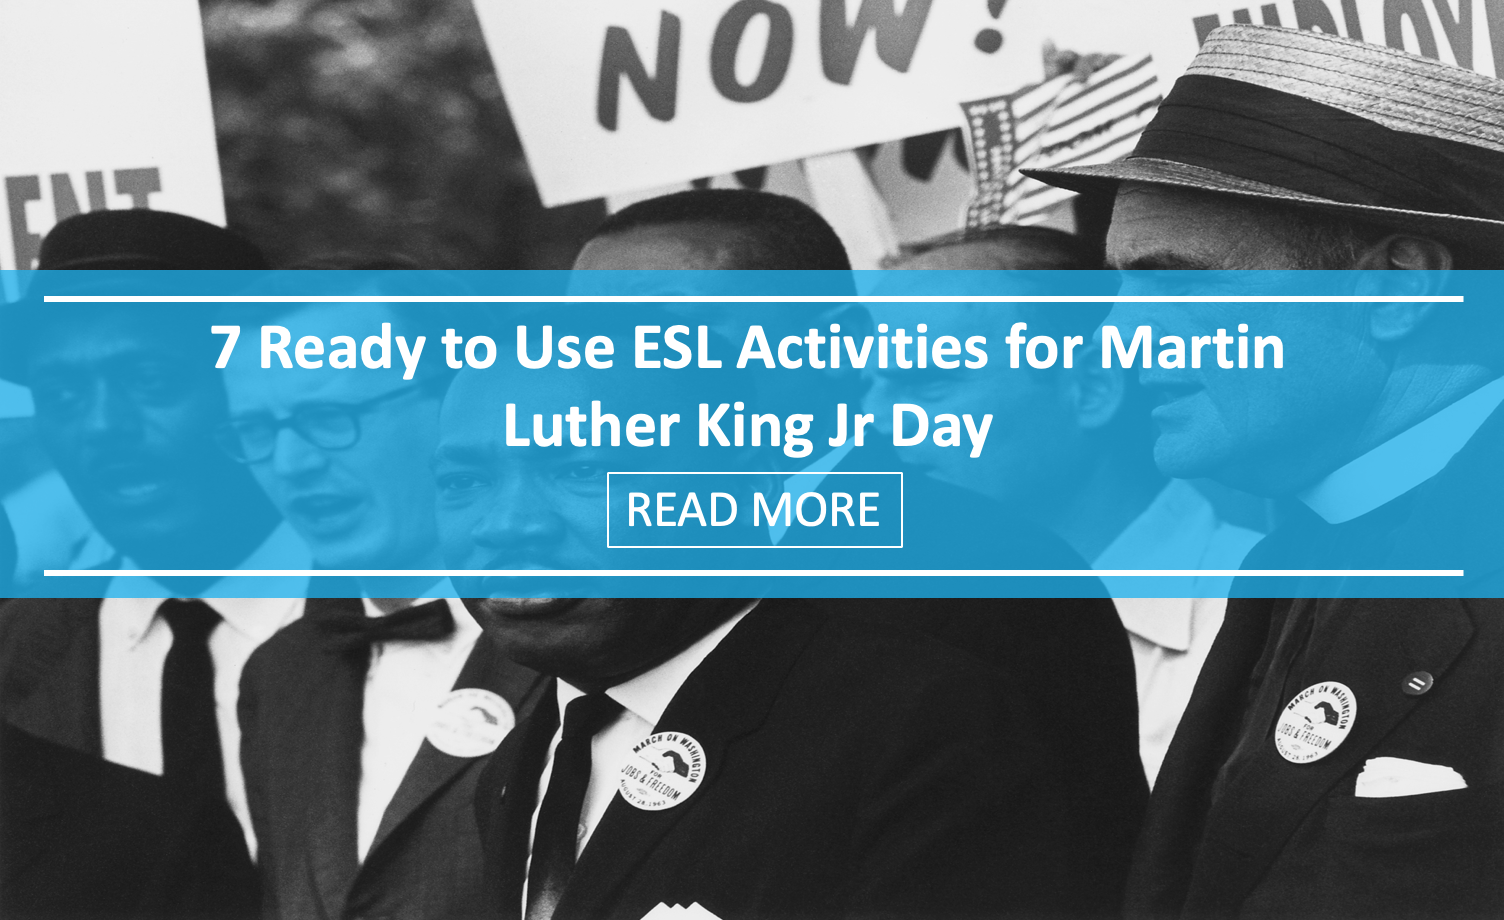 7 Ready to Use ESL Activities for Martin Luther King Day